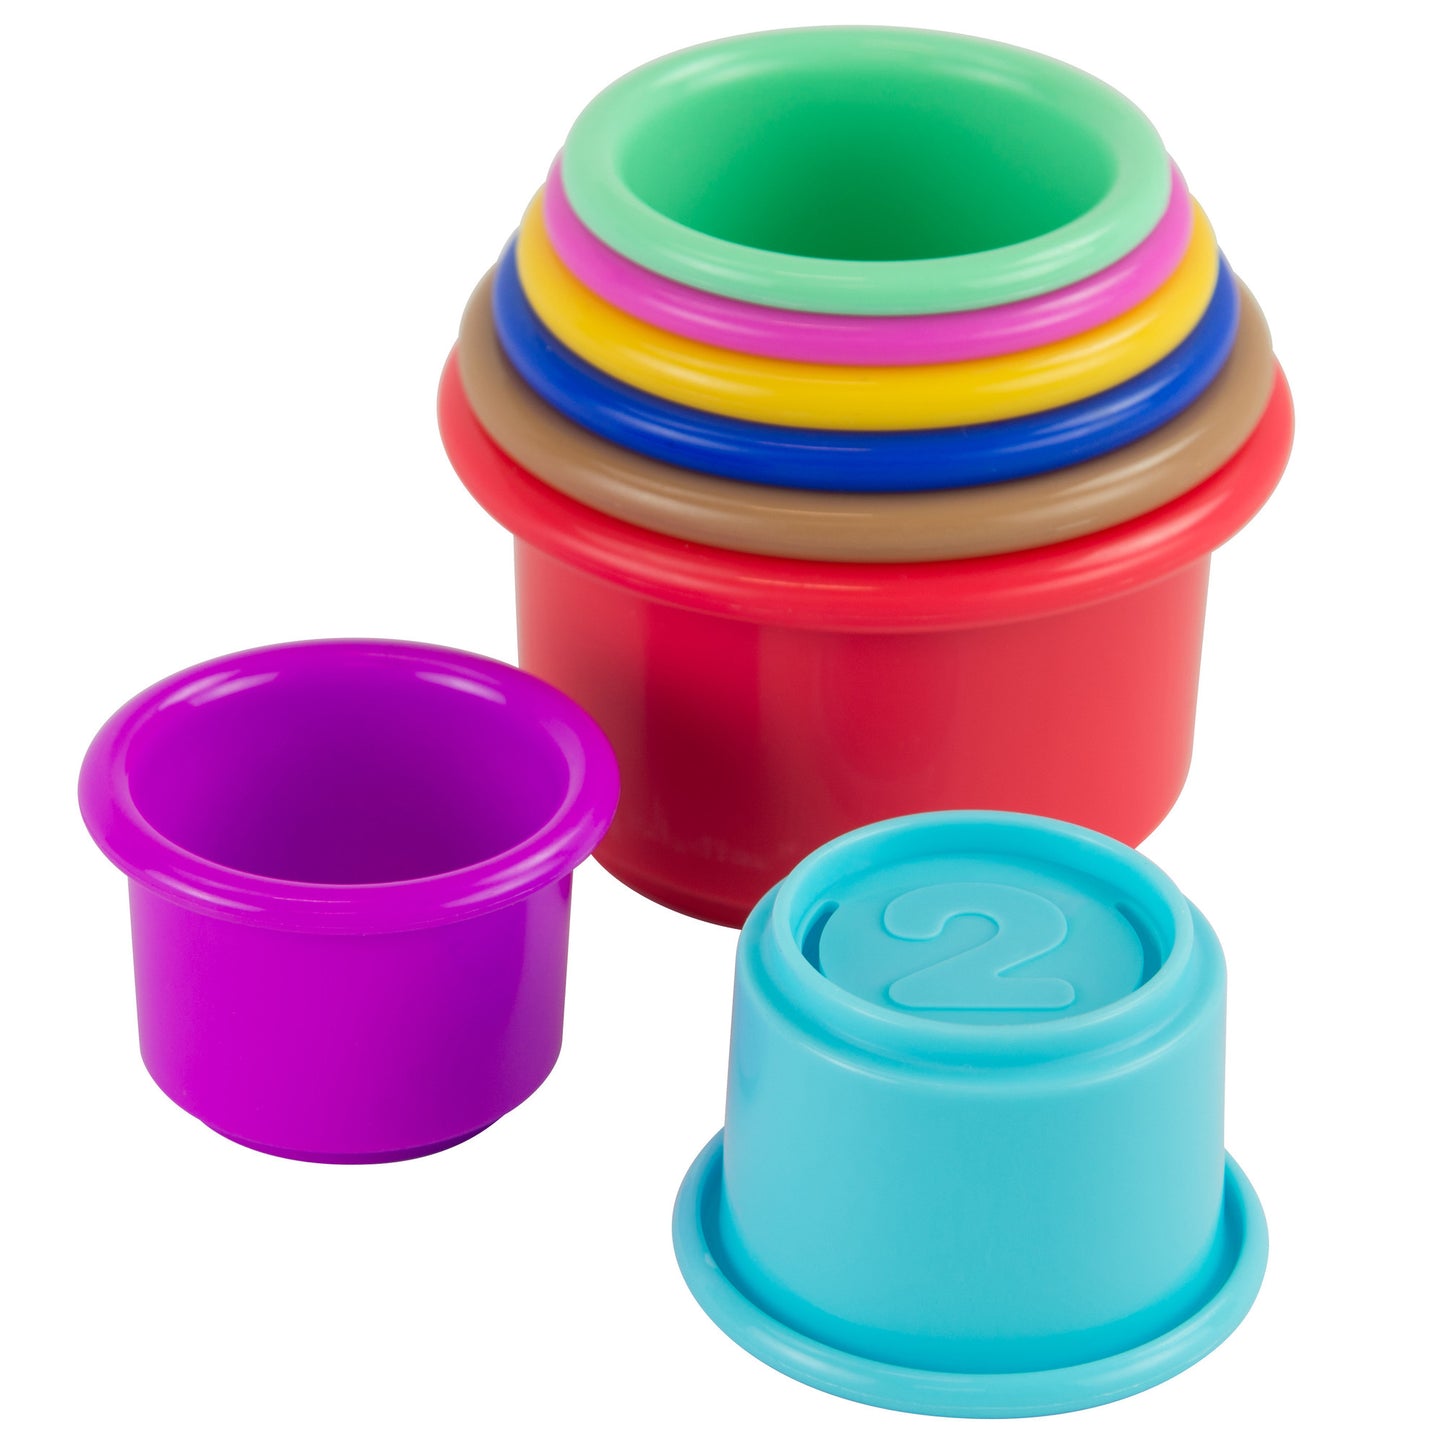 Lamaze Pile & Play Cups at Baby City